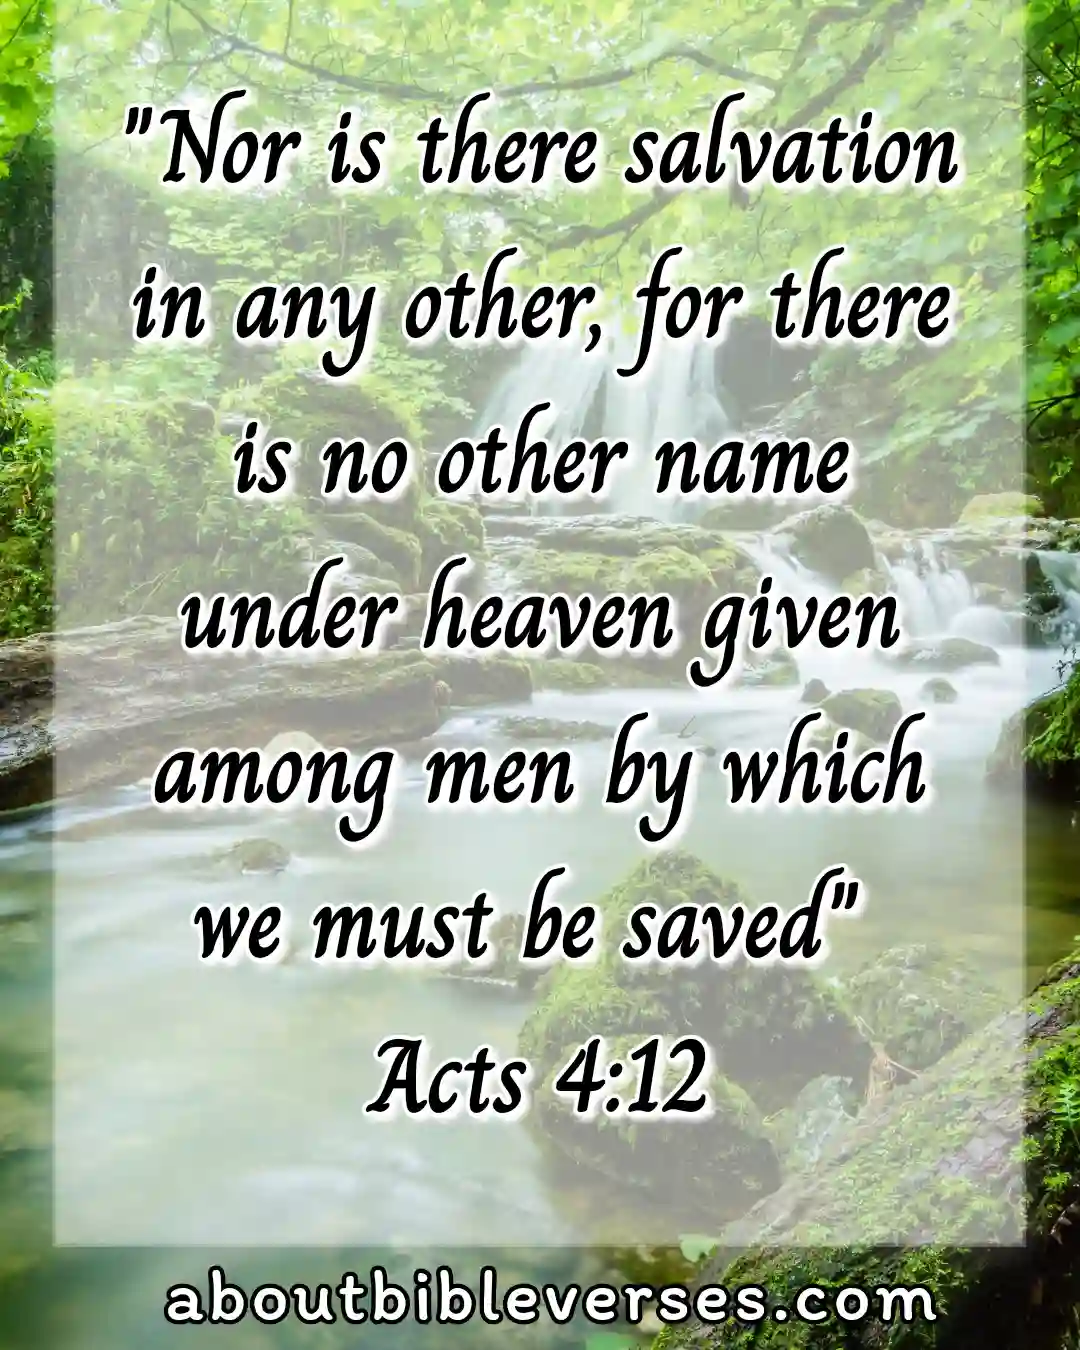 Today bible verse (Acts 4:12)